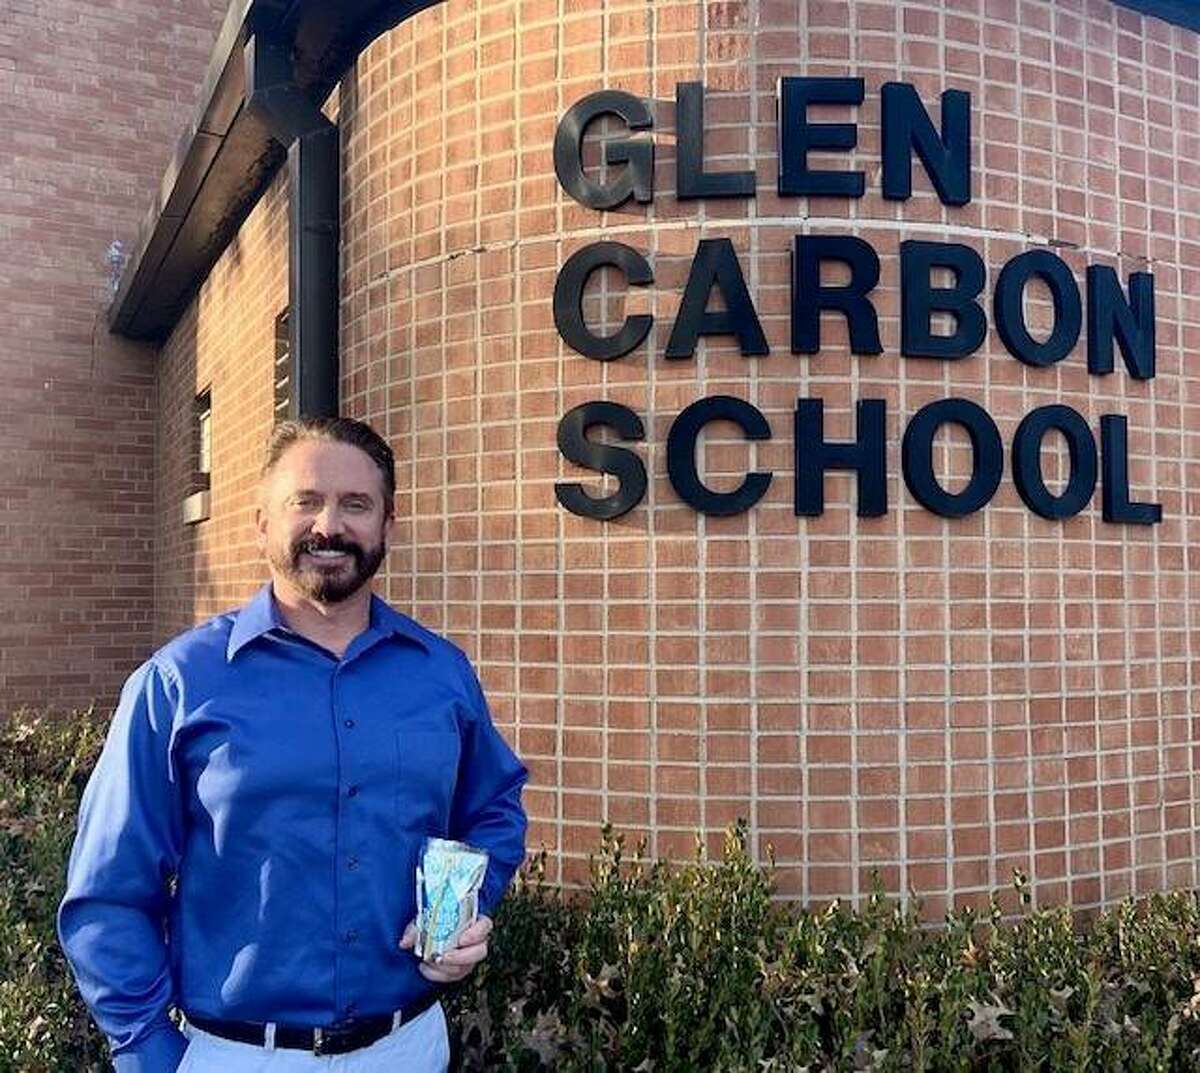 Kraft Heinz employee Jeff Garde stands in front of Glen Carbon Elementary School after helping deliver a donation of water-filled Capri Sun pouches. Garde, a Glen Carbon resident, has children who were once students at the elementary school.